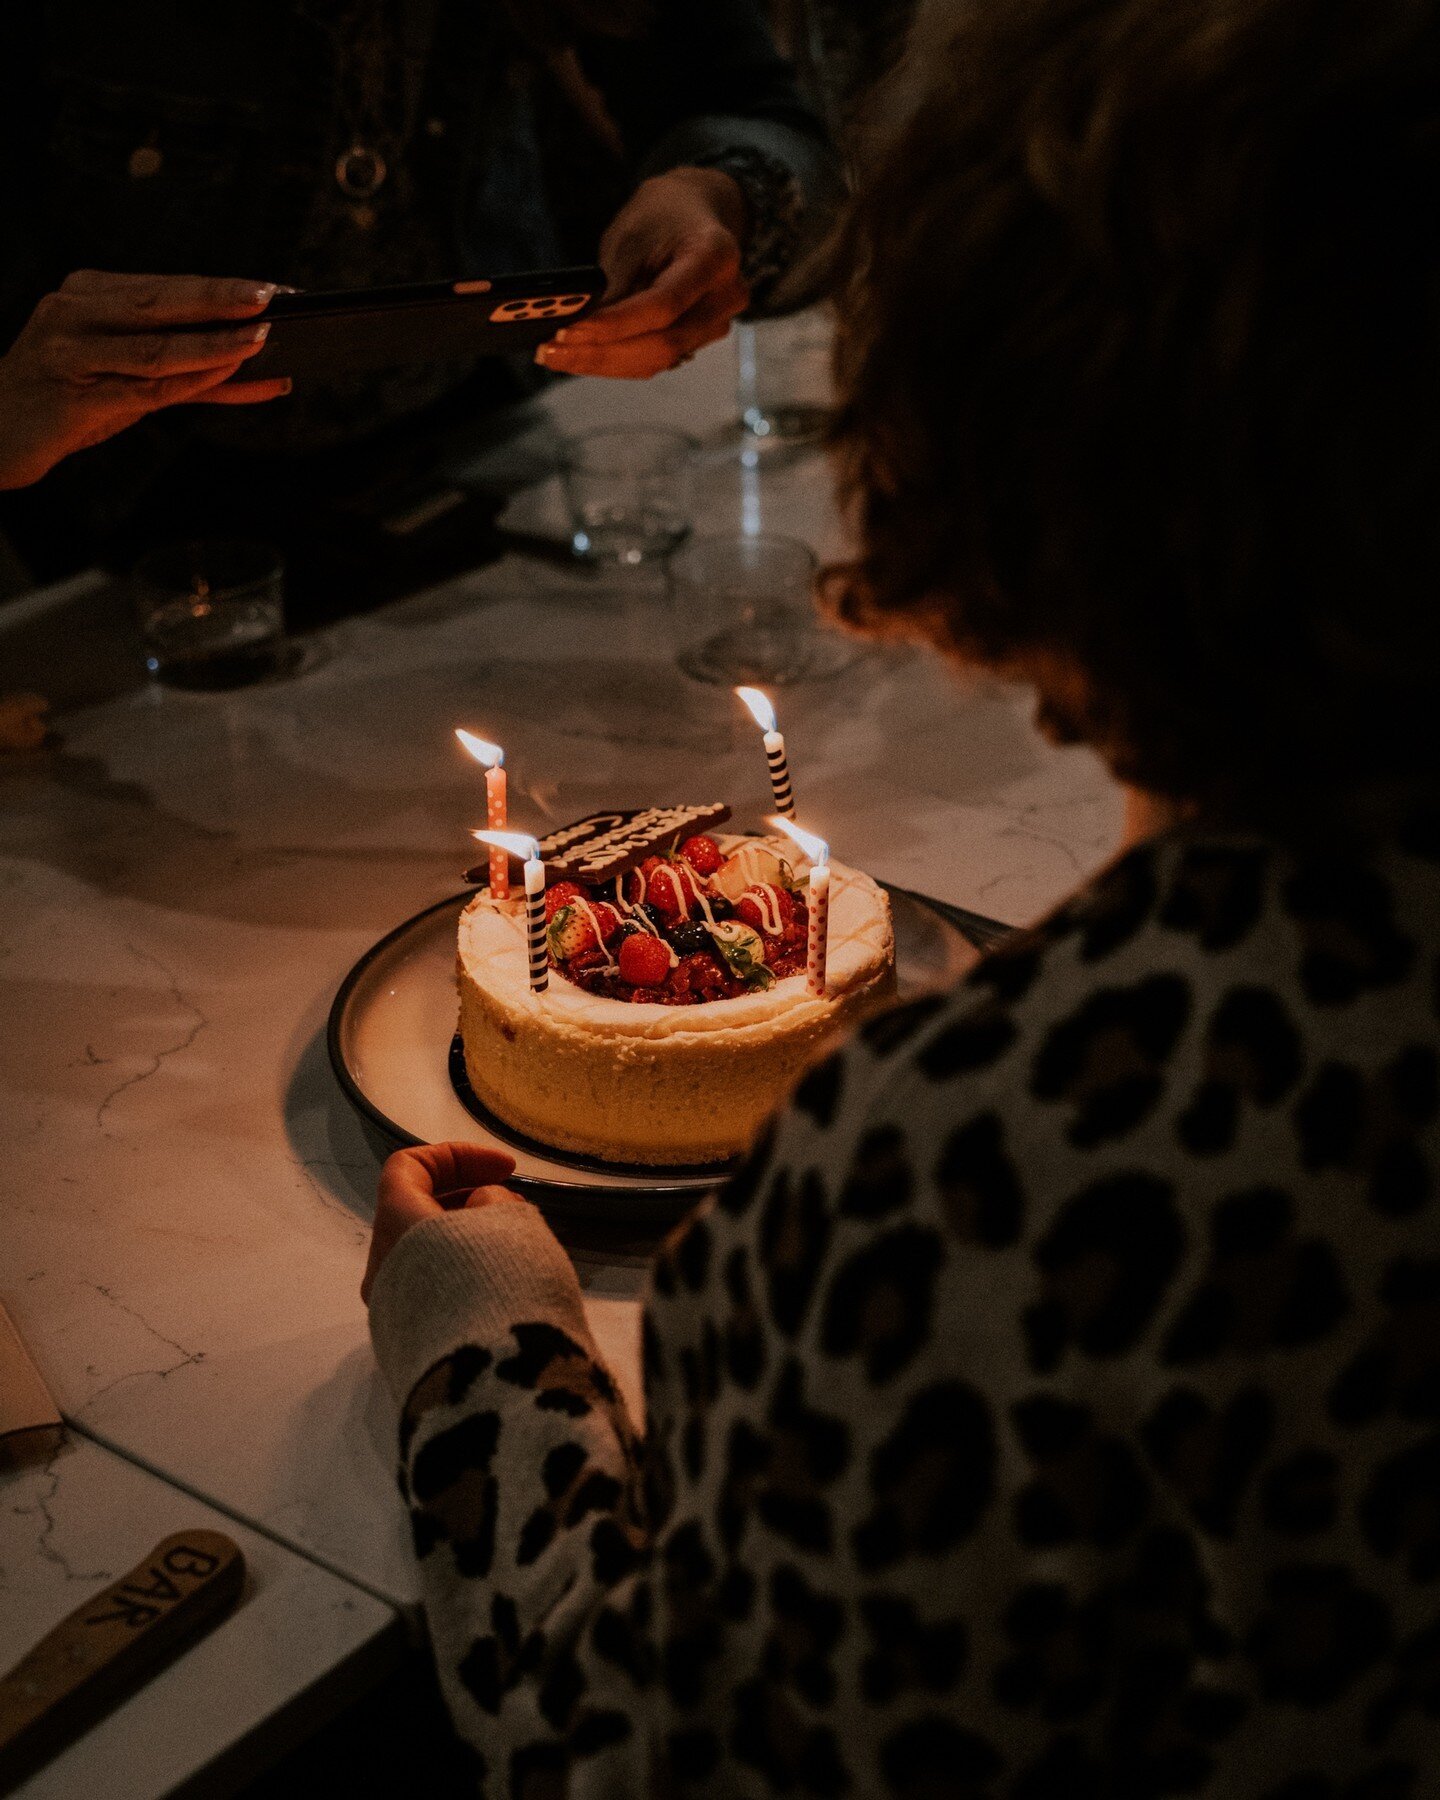 A new month is almost here, so&hellip;.if there&rsquo;s any celebration about to take place, you know we&rsquo;ll be waiting at 91 Grimshaw St.

Join us for cocktails, Asian Fusion favourites and good vibes.

[bookings online]